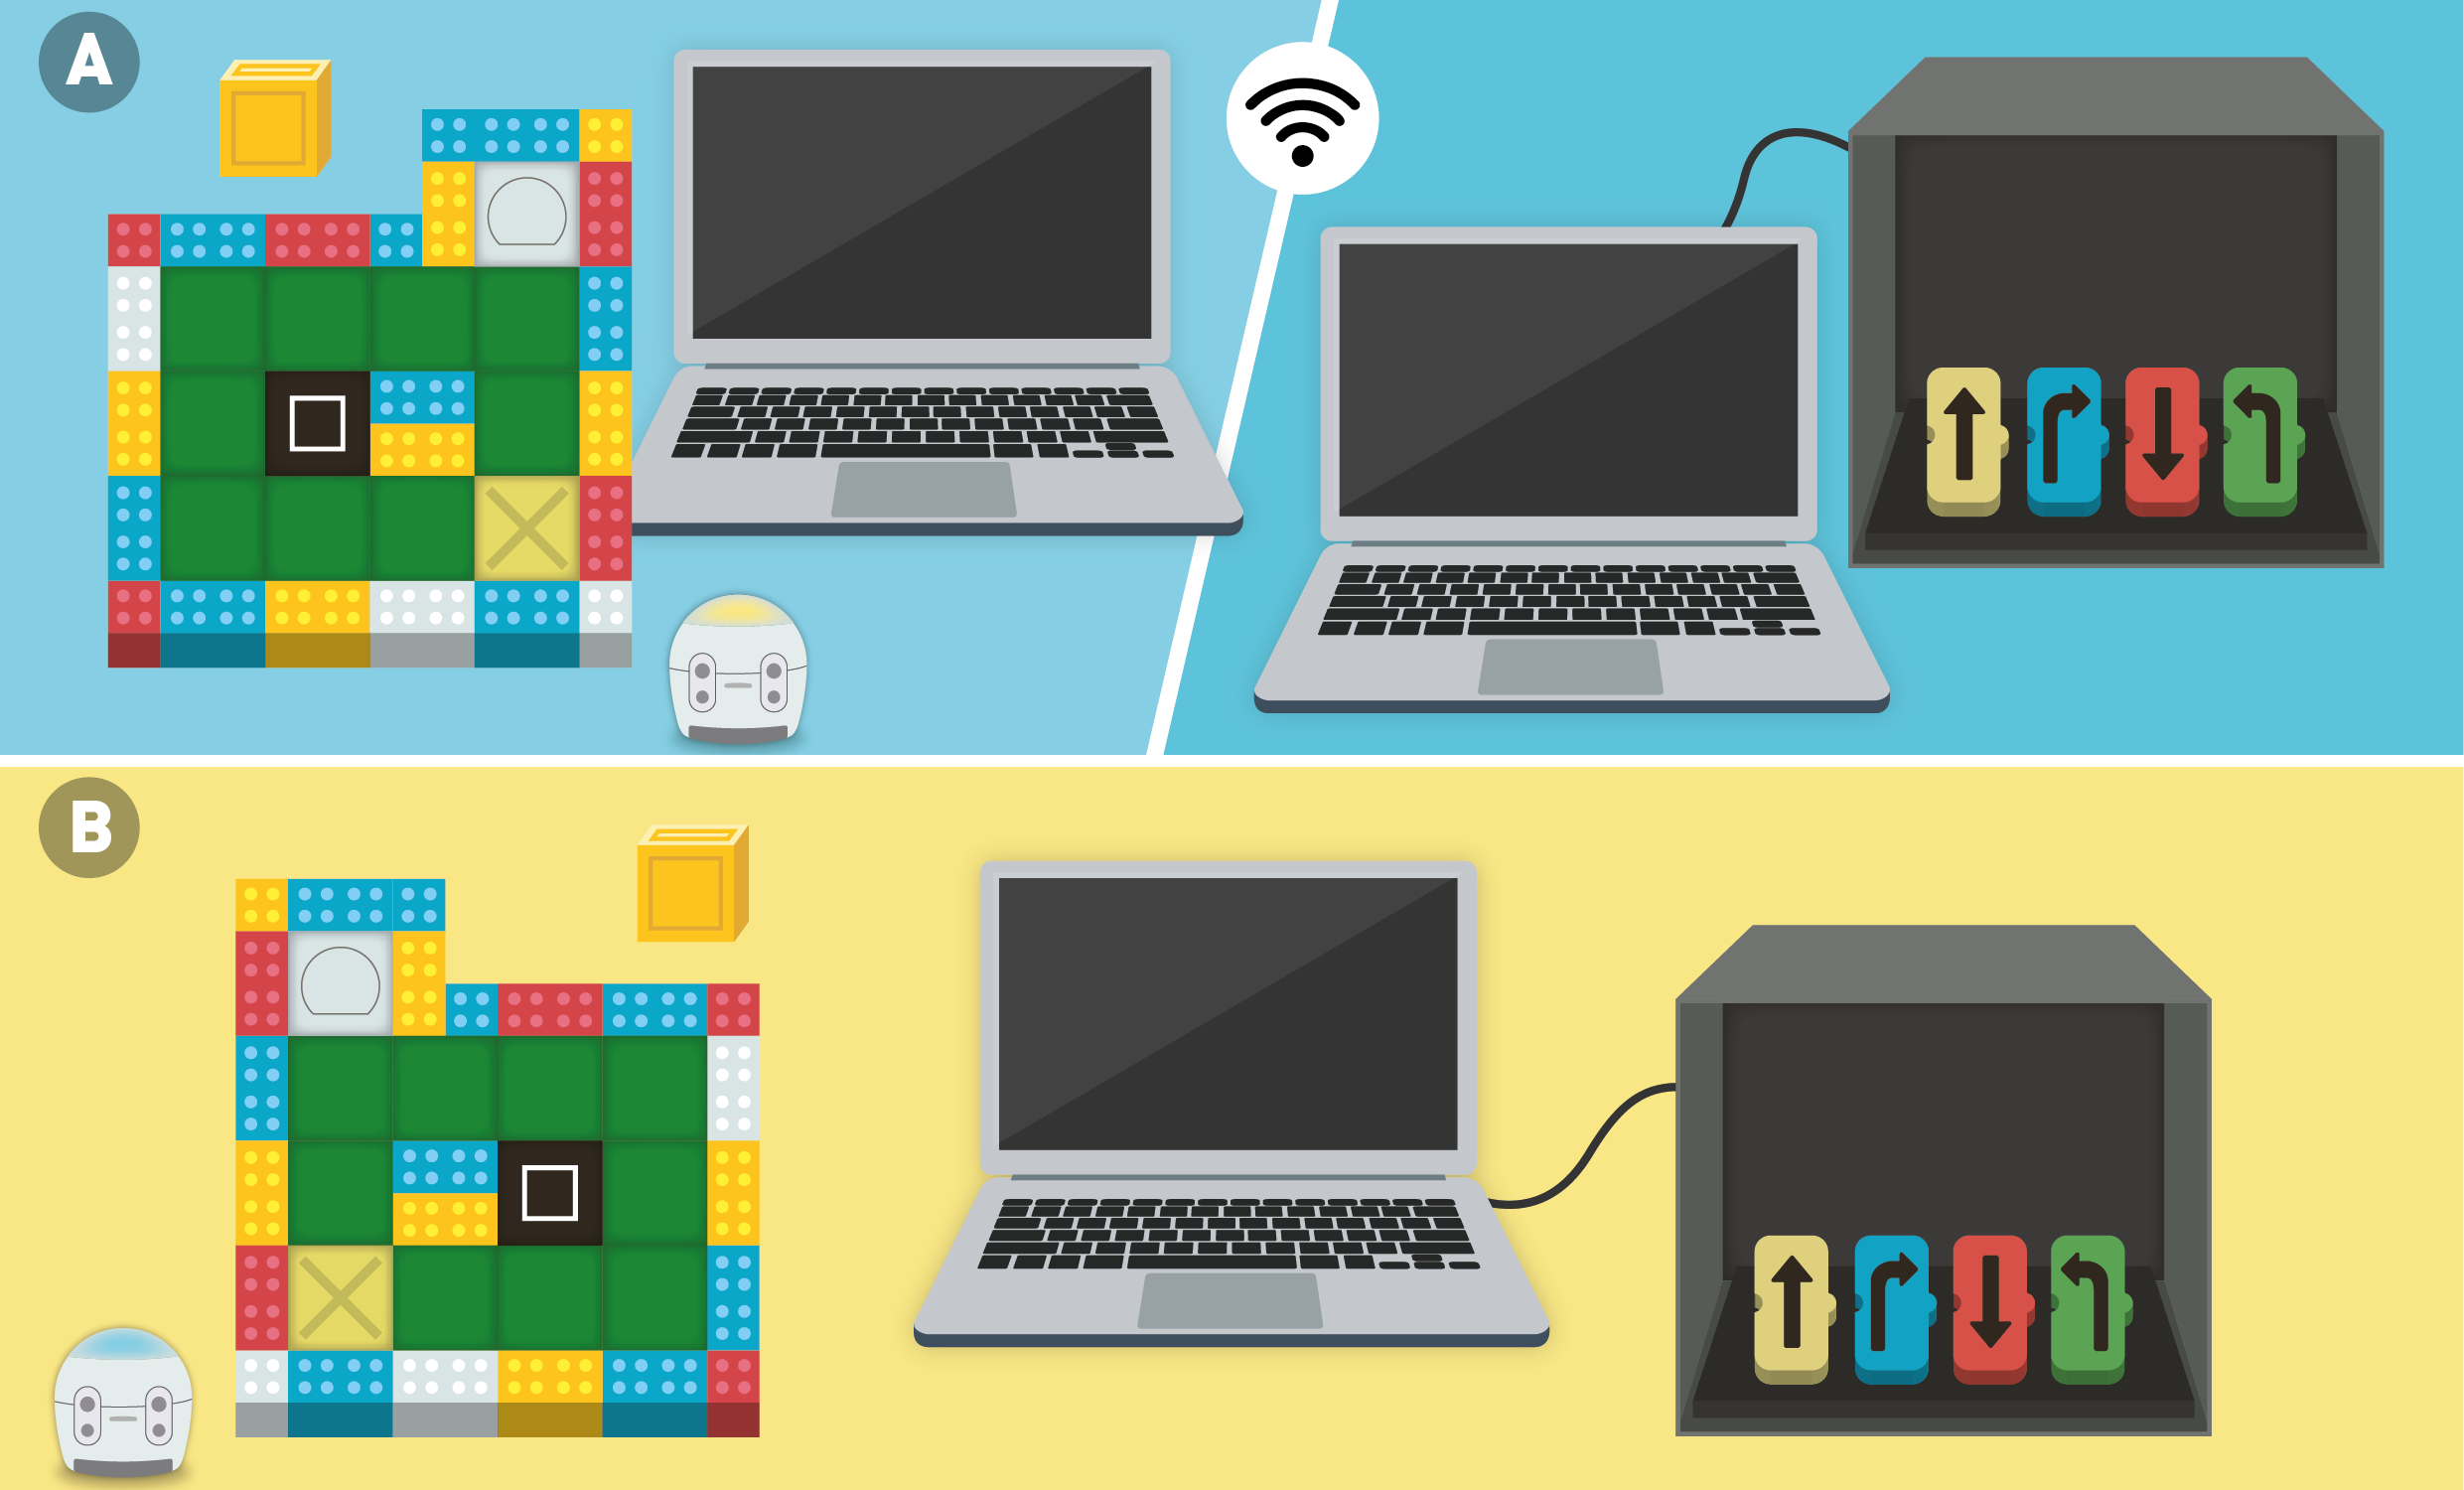 Colorful cartoon representation of the role's workspace and its elements. On the top, two separated blue backgrounds represent the remote environment connected by Wi-Fi. On the left, the map explorer's workspace with the LEGO-based map, an Ozobot Evo, a yellow crate, and a PC. On the right, the block commander's workspace with the PC is connected to the magic box with the four types of coding blocks inside. On the bottom, a yellow rectangle background represents the co-located environment with the map explorer's workspace on the left, with the LEGO-based map, an Ozobot Evo, and a yellow crate. In the middle, is the PC they both share. On the right, connected to the PC, the magic box with the four types of coding blocks inside.